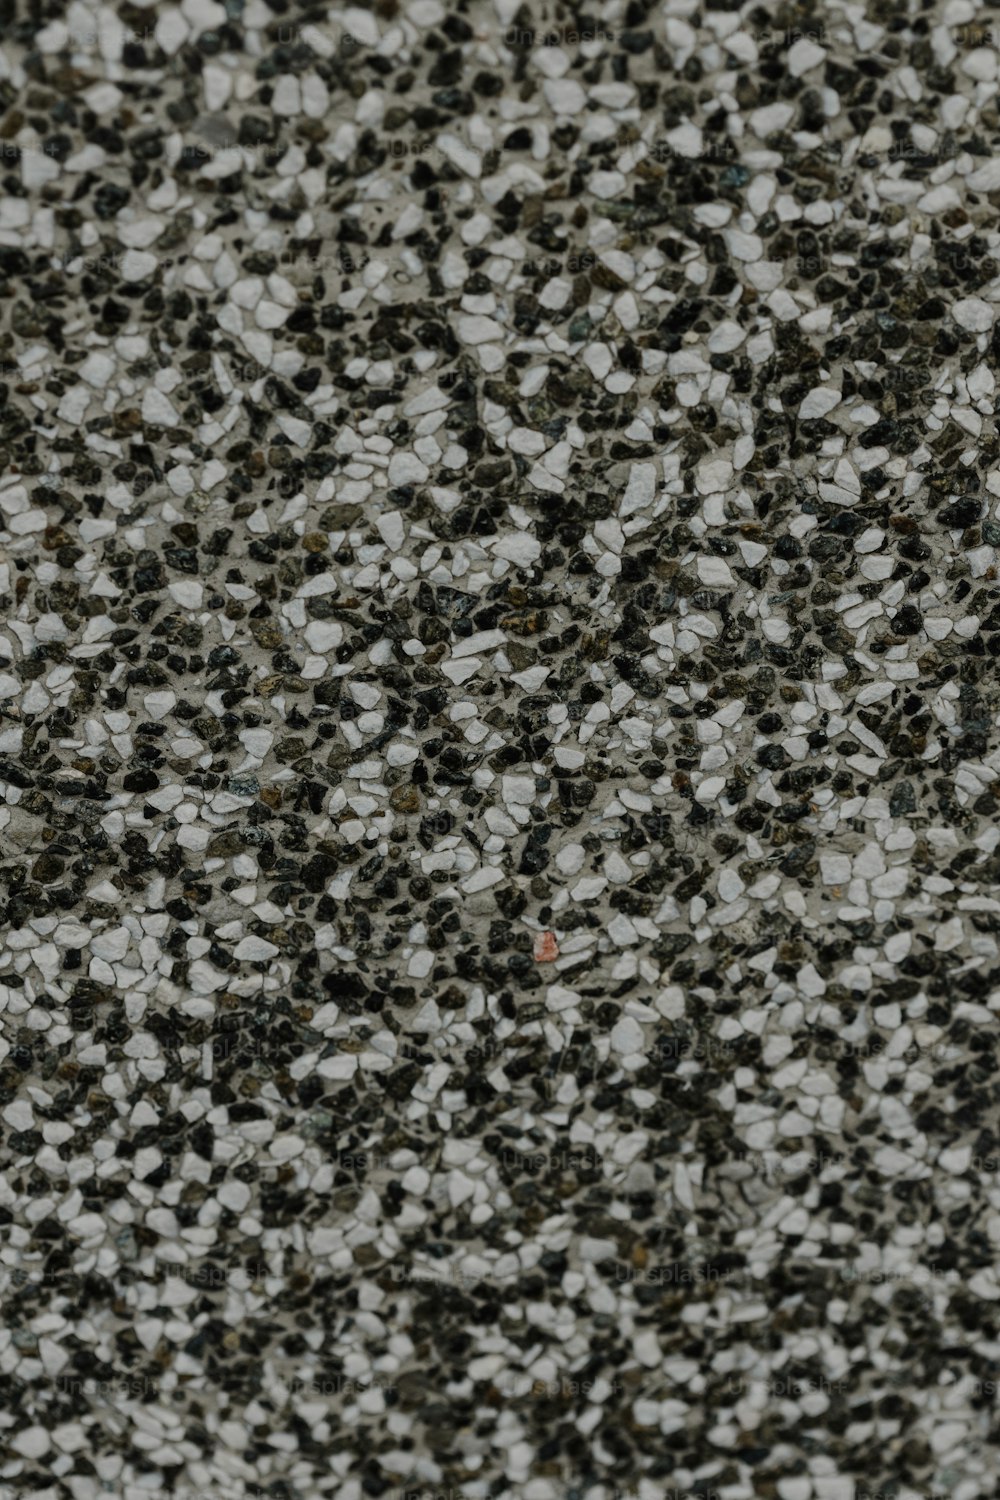 a close up of a black and white speckled surface